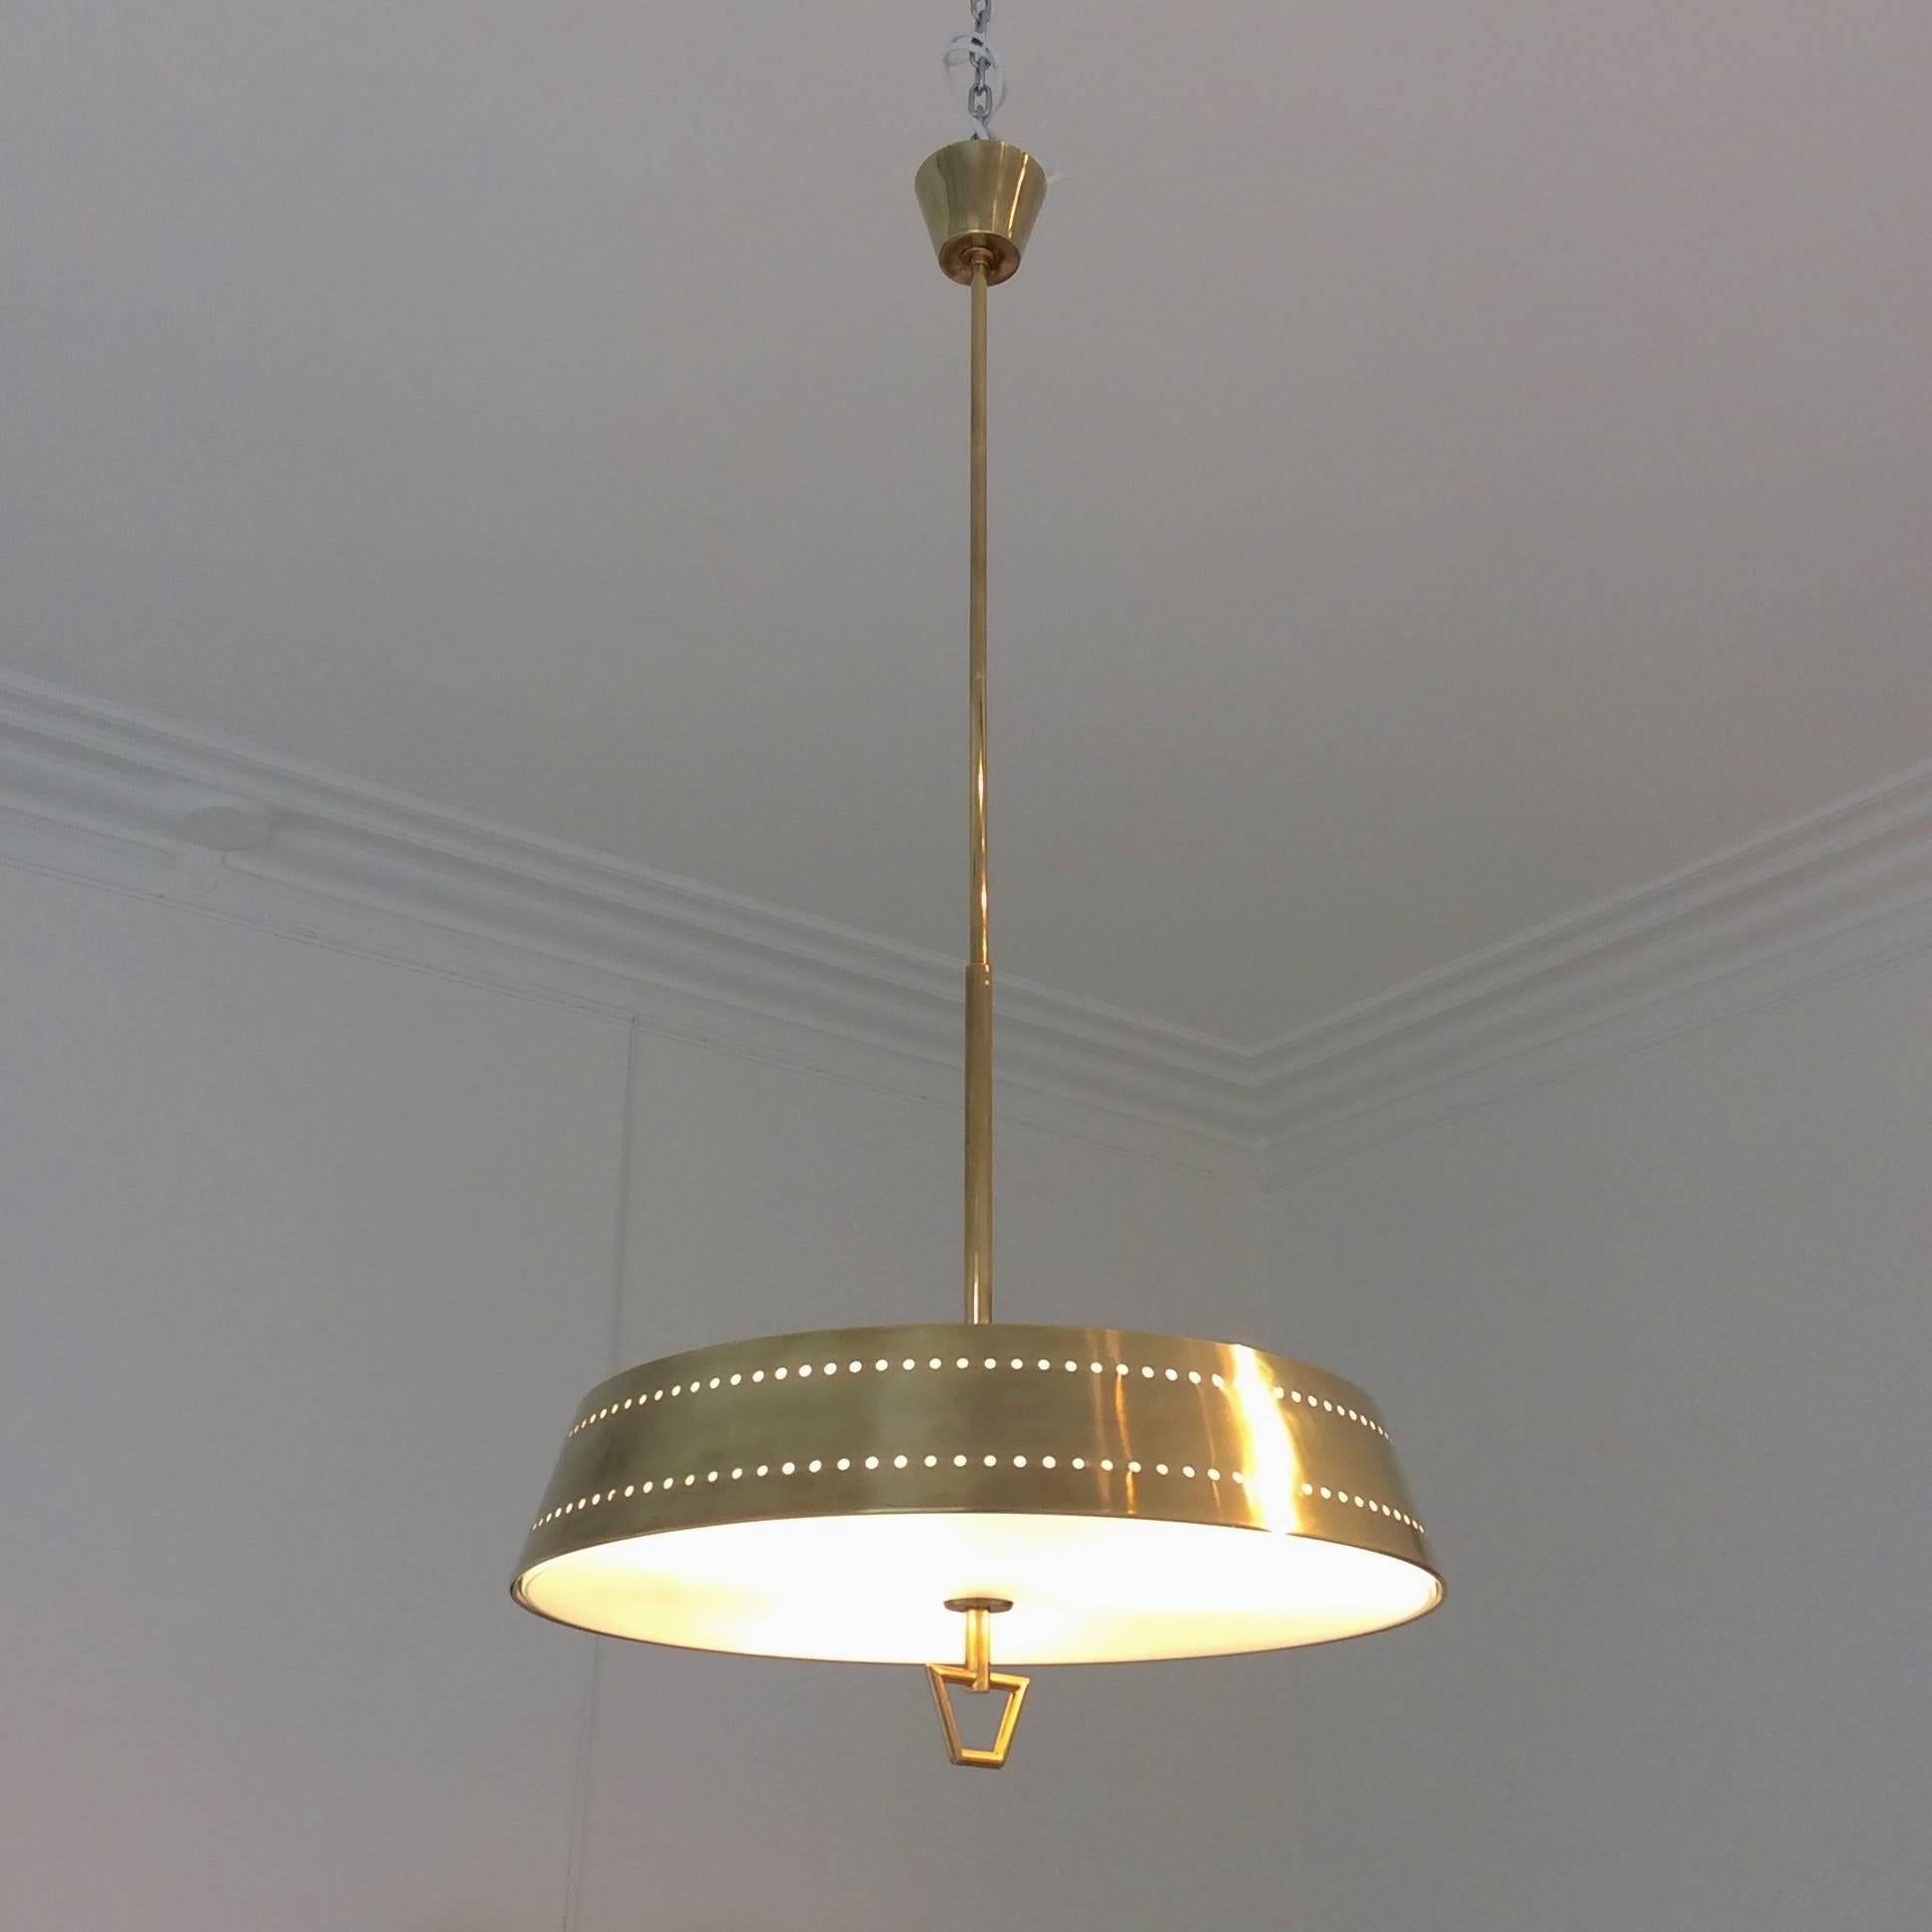 Nice Stilnovo hanging lamp, circa 1950, Italy.
Brass and frosted glass.
Three bulbs of 40 watts.
Rewired.
Measures: H: 118 cm, diameter 45 cm.
Good original condition.

 